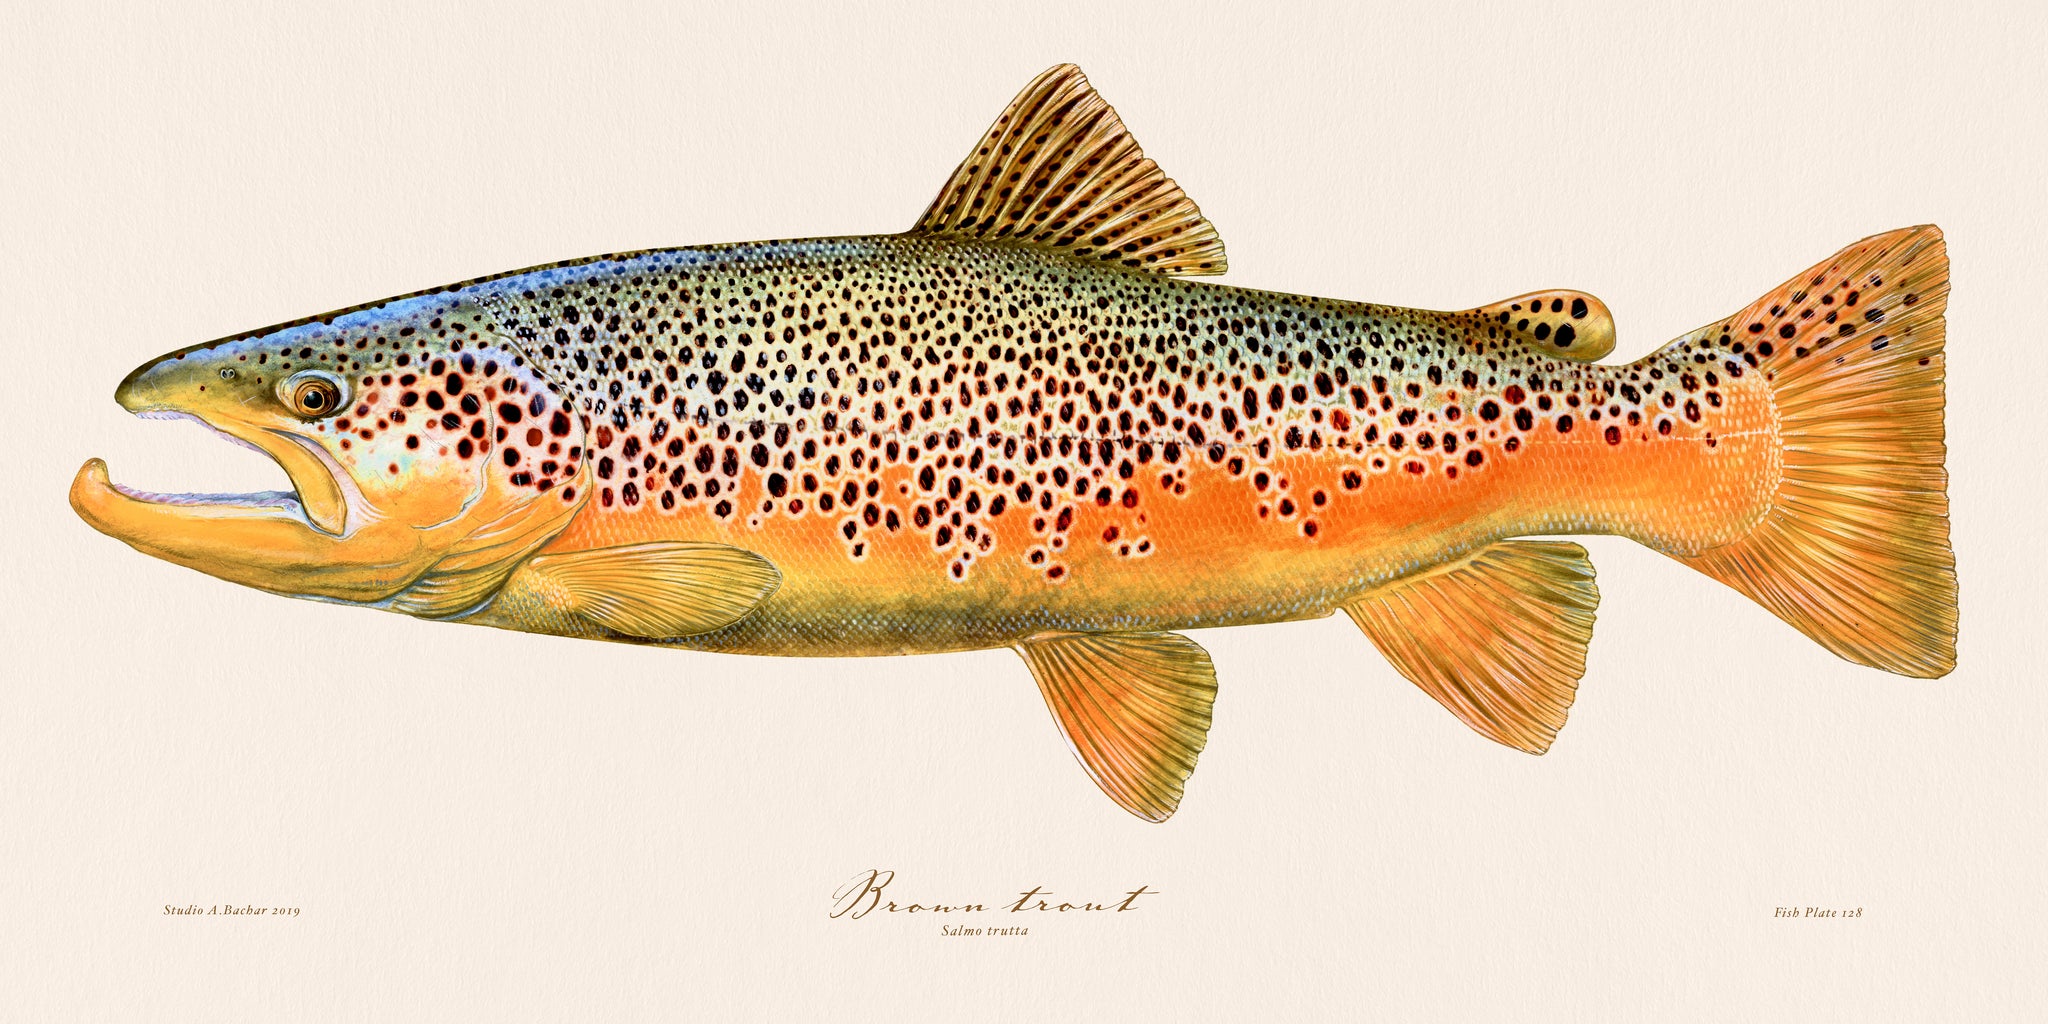 Brown Trout Illustration 128